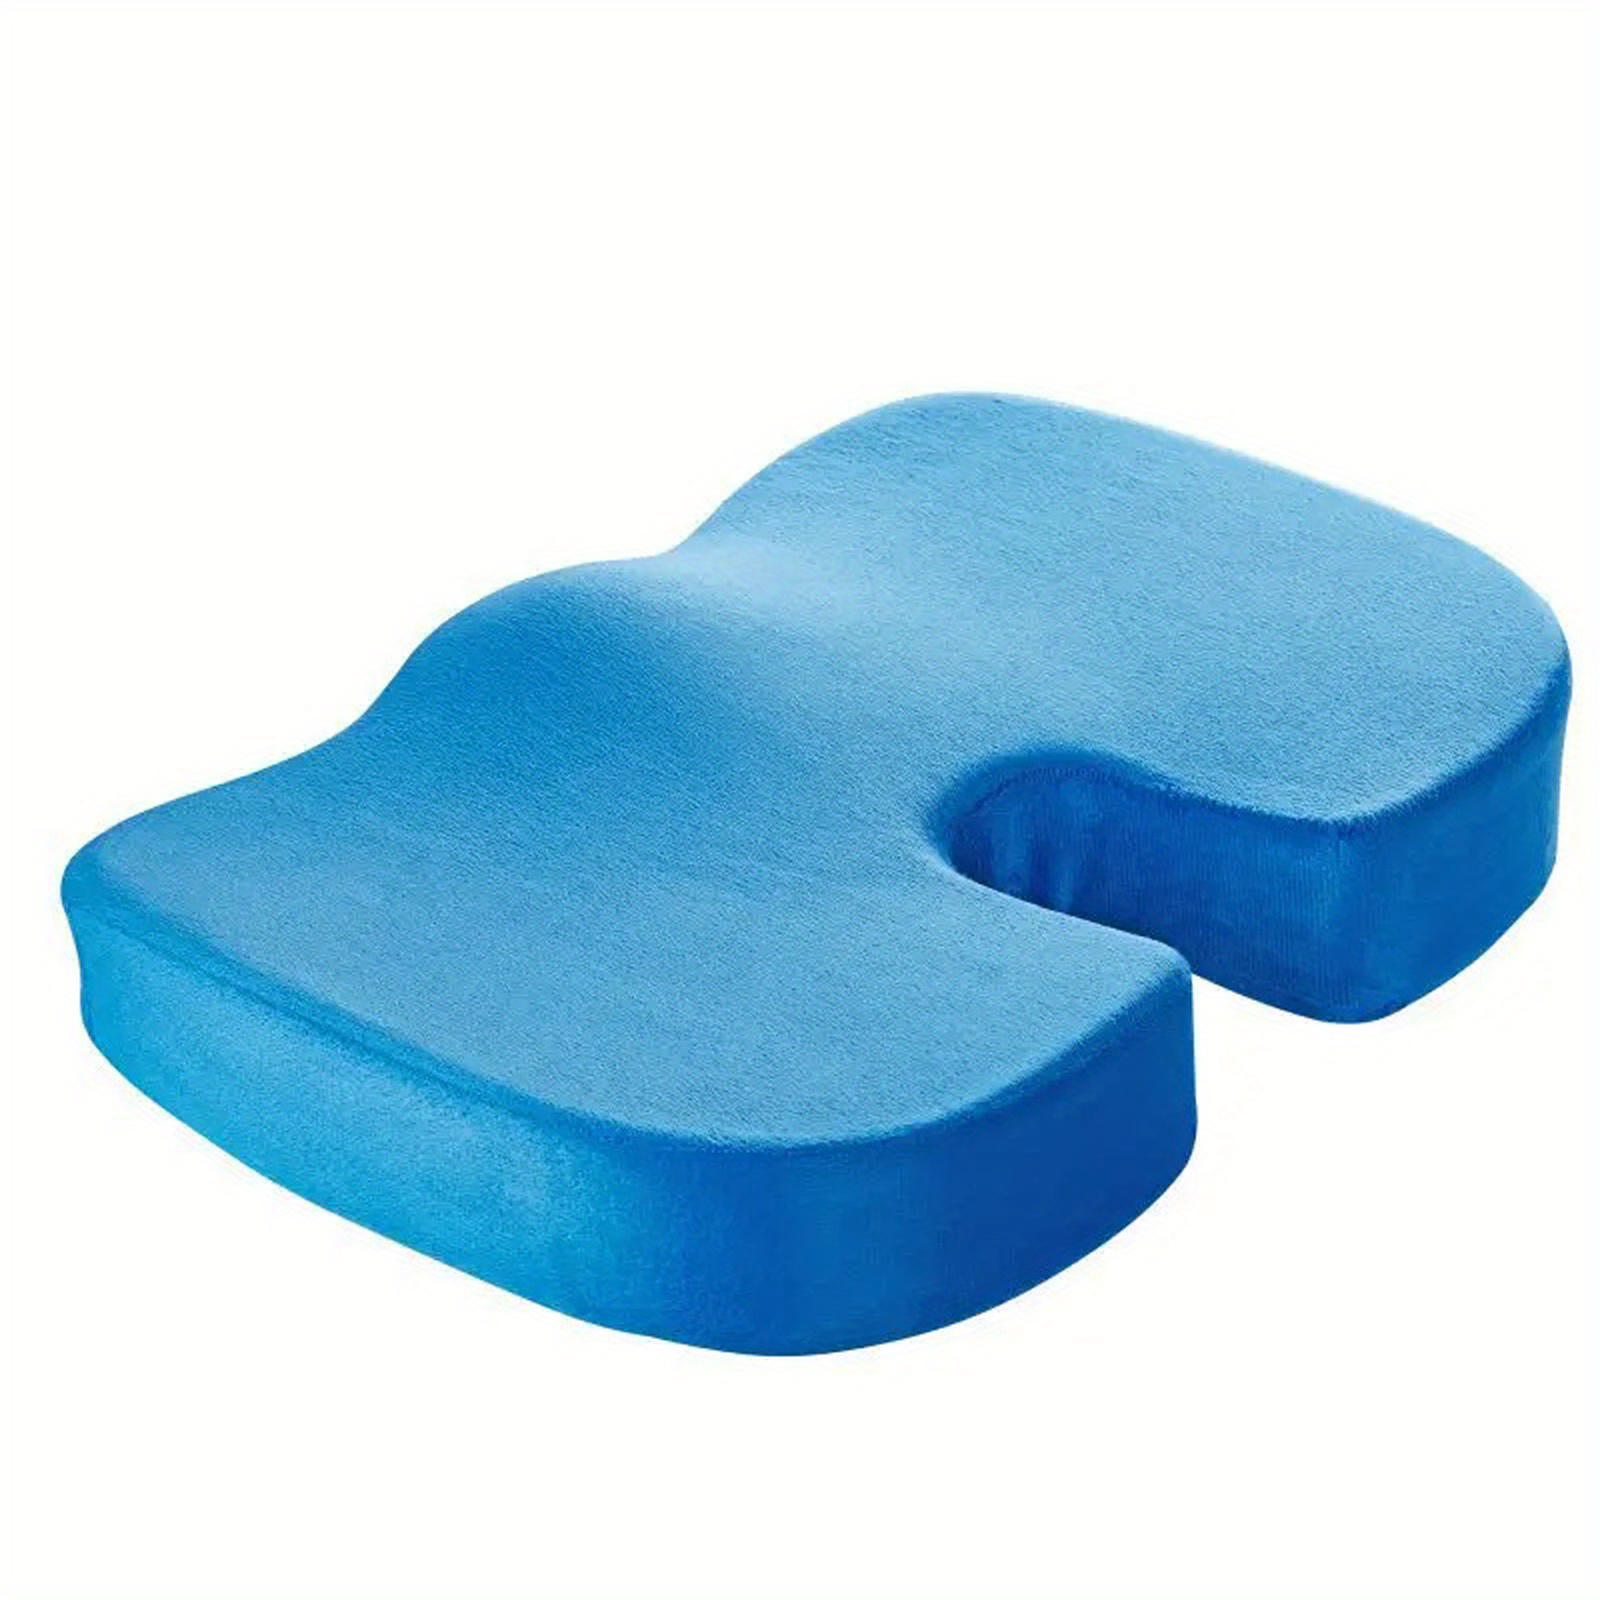 Deluxe Comfort Sciatica Cushion for Coccydynia Pain, Blue